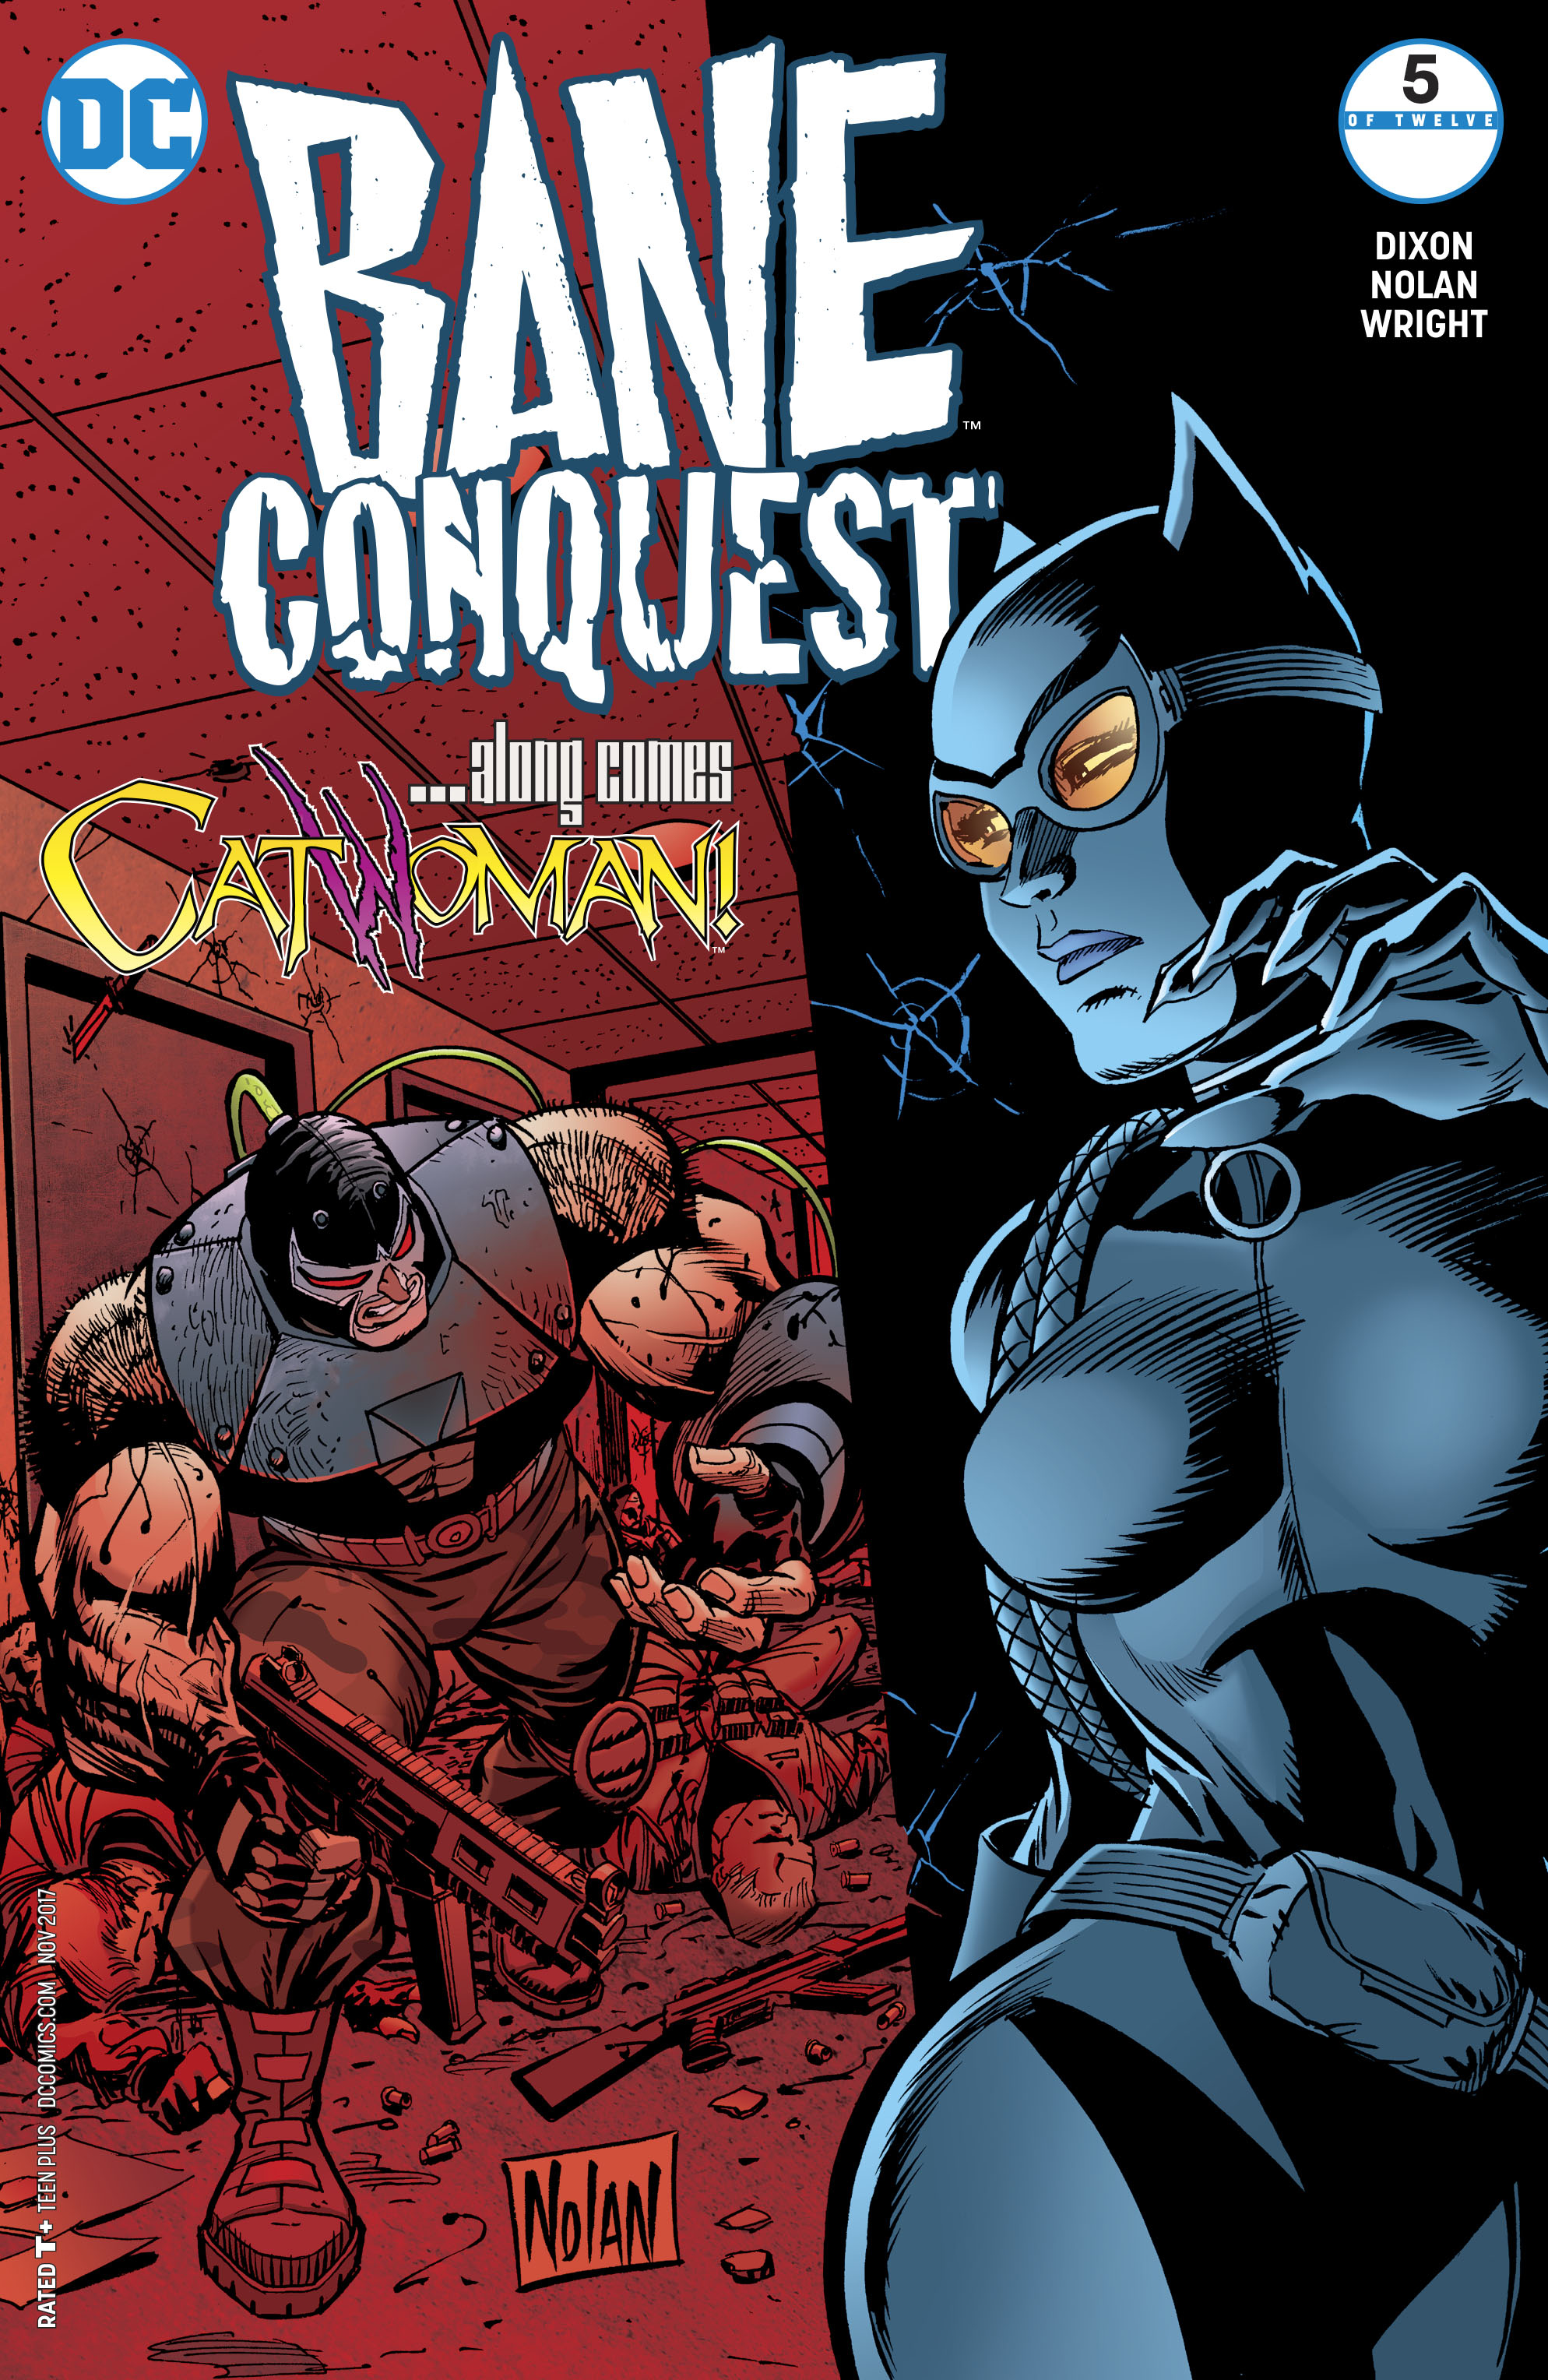 BANE CONQUEST #5 (OF 12)